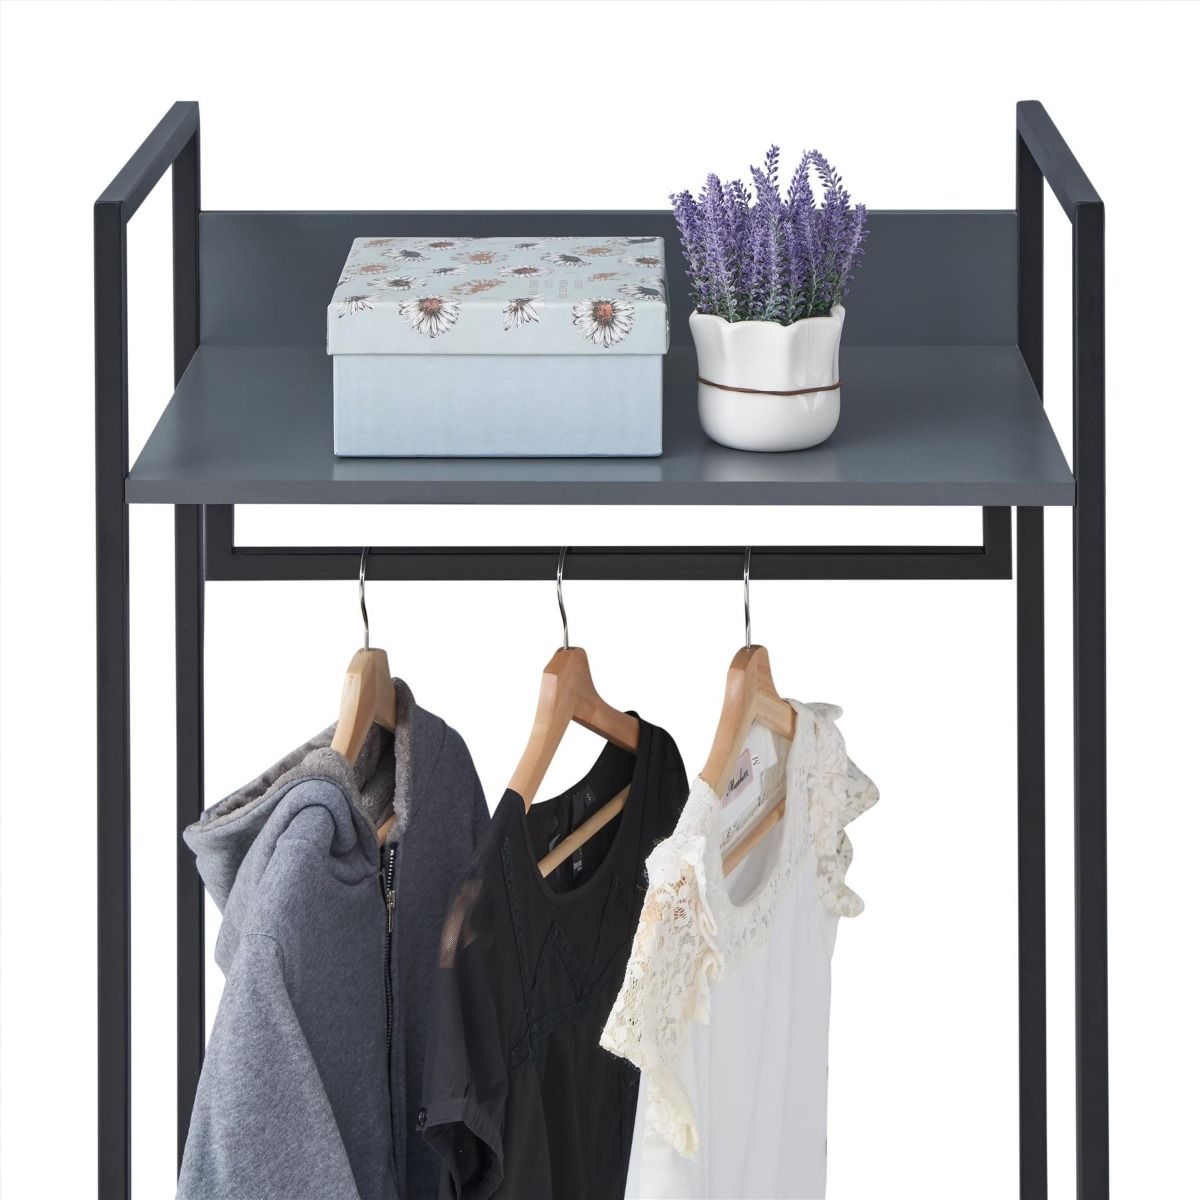 Seville Open Wardrobe Unit with 2 Drawers Clothing Storage Unit Industrial Design